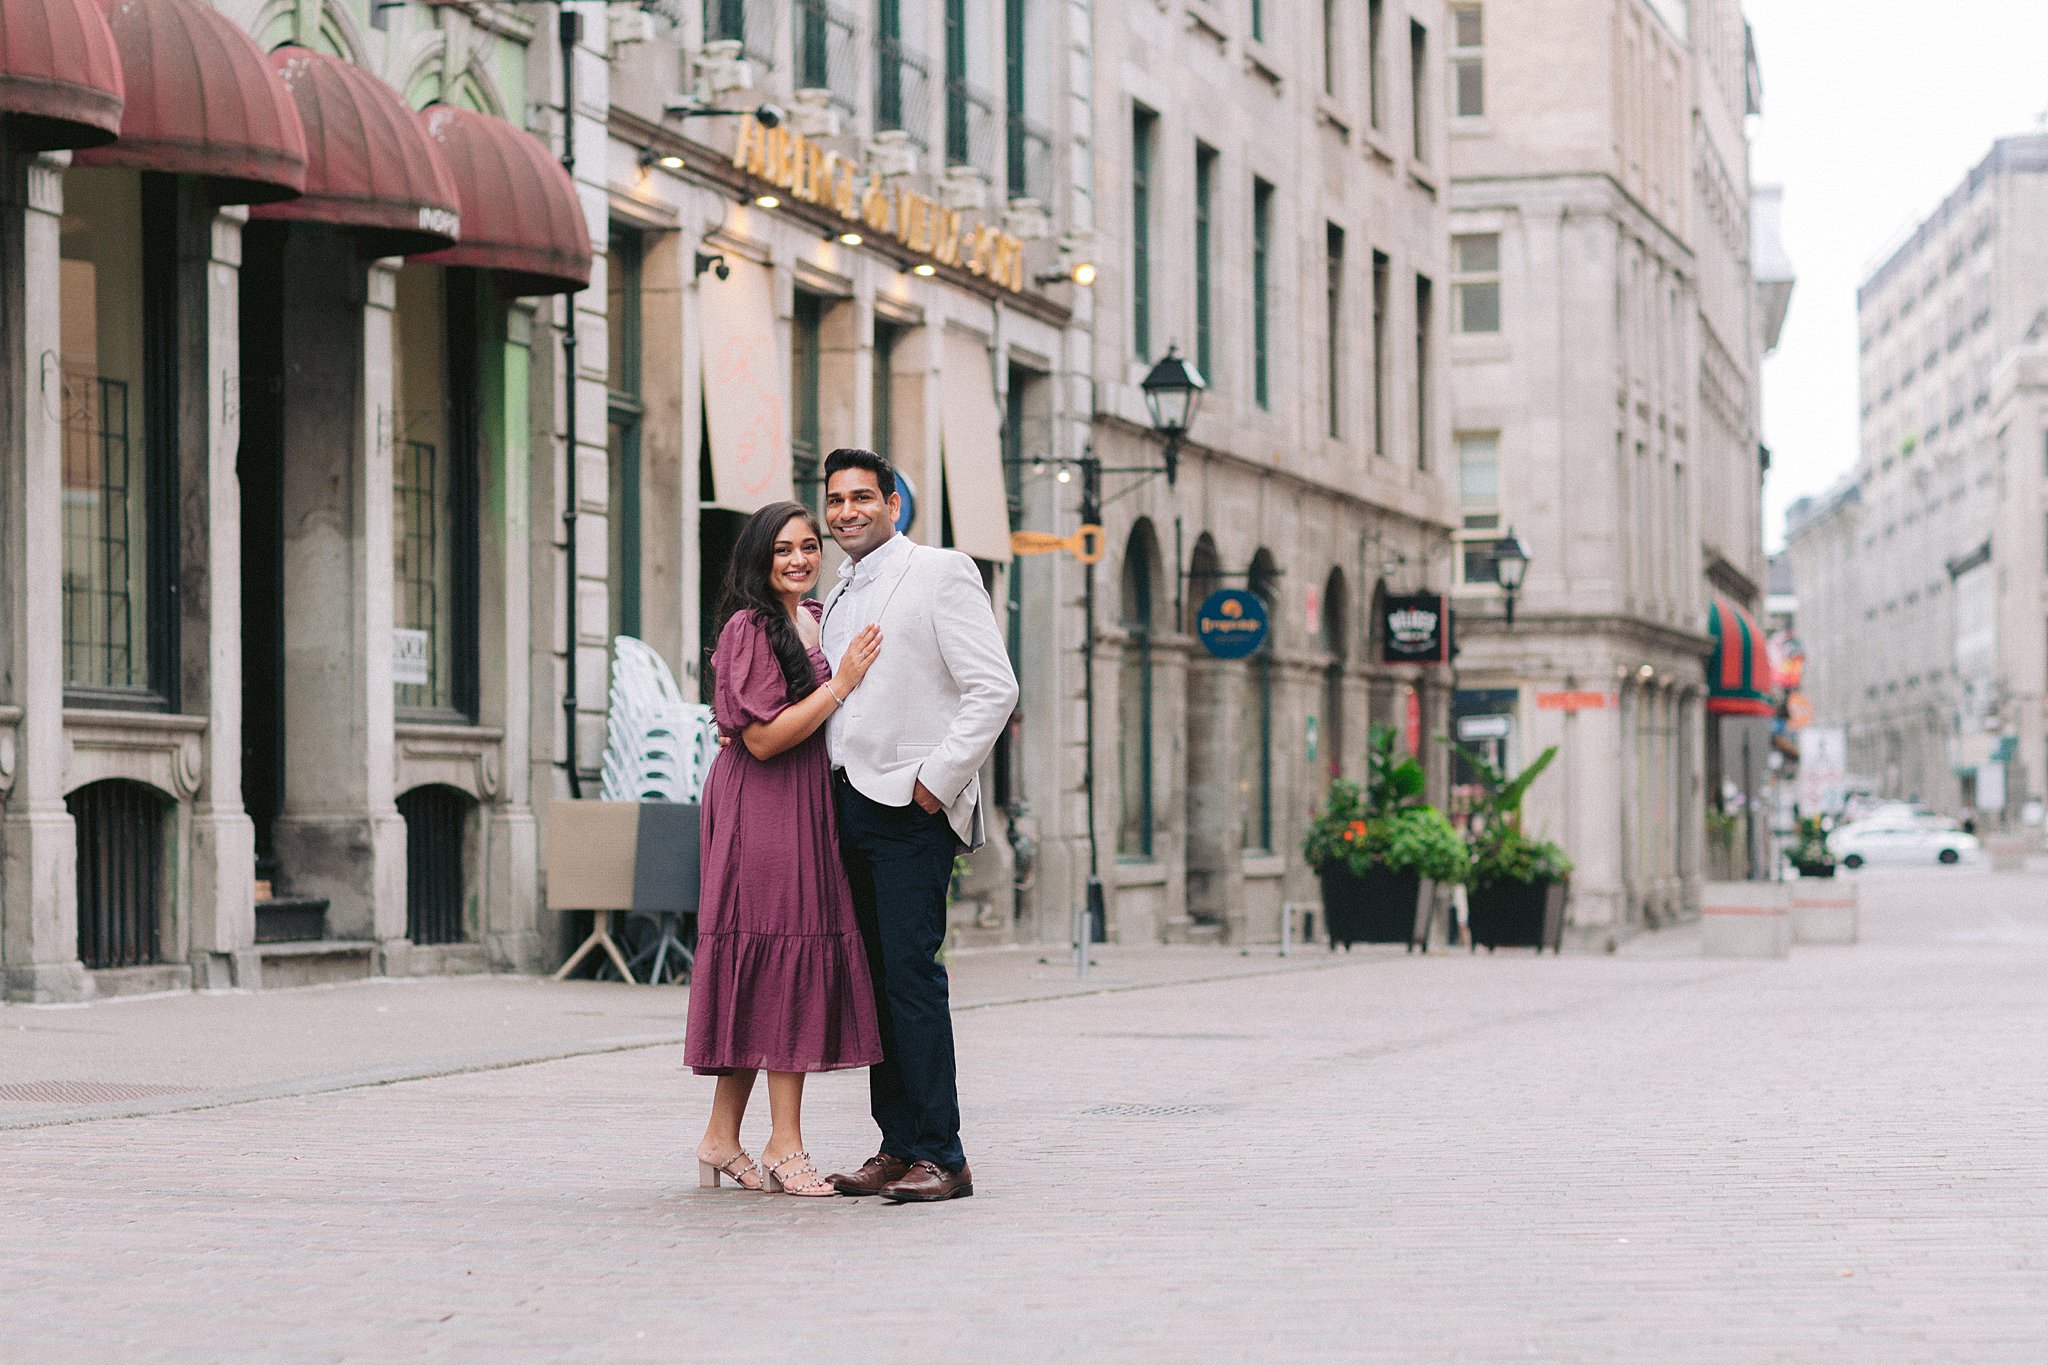 A journey of love through Montreal's charming neighborhoods